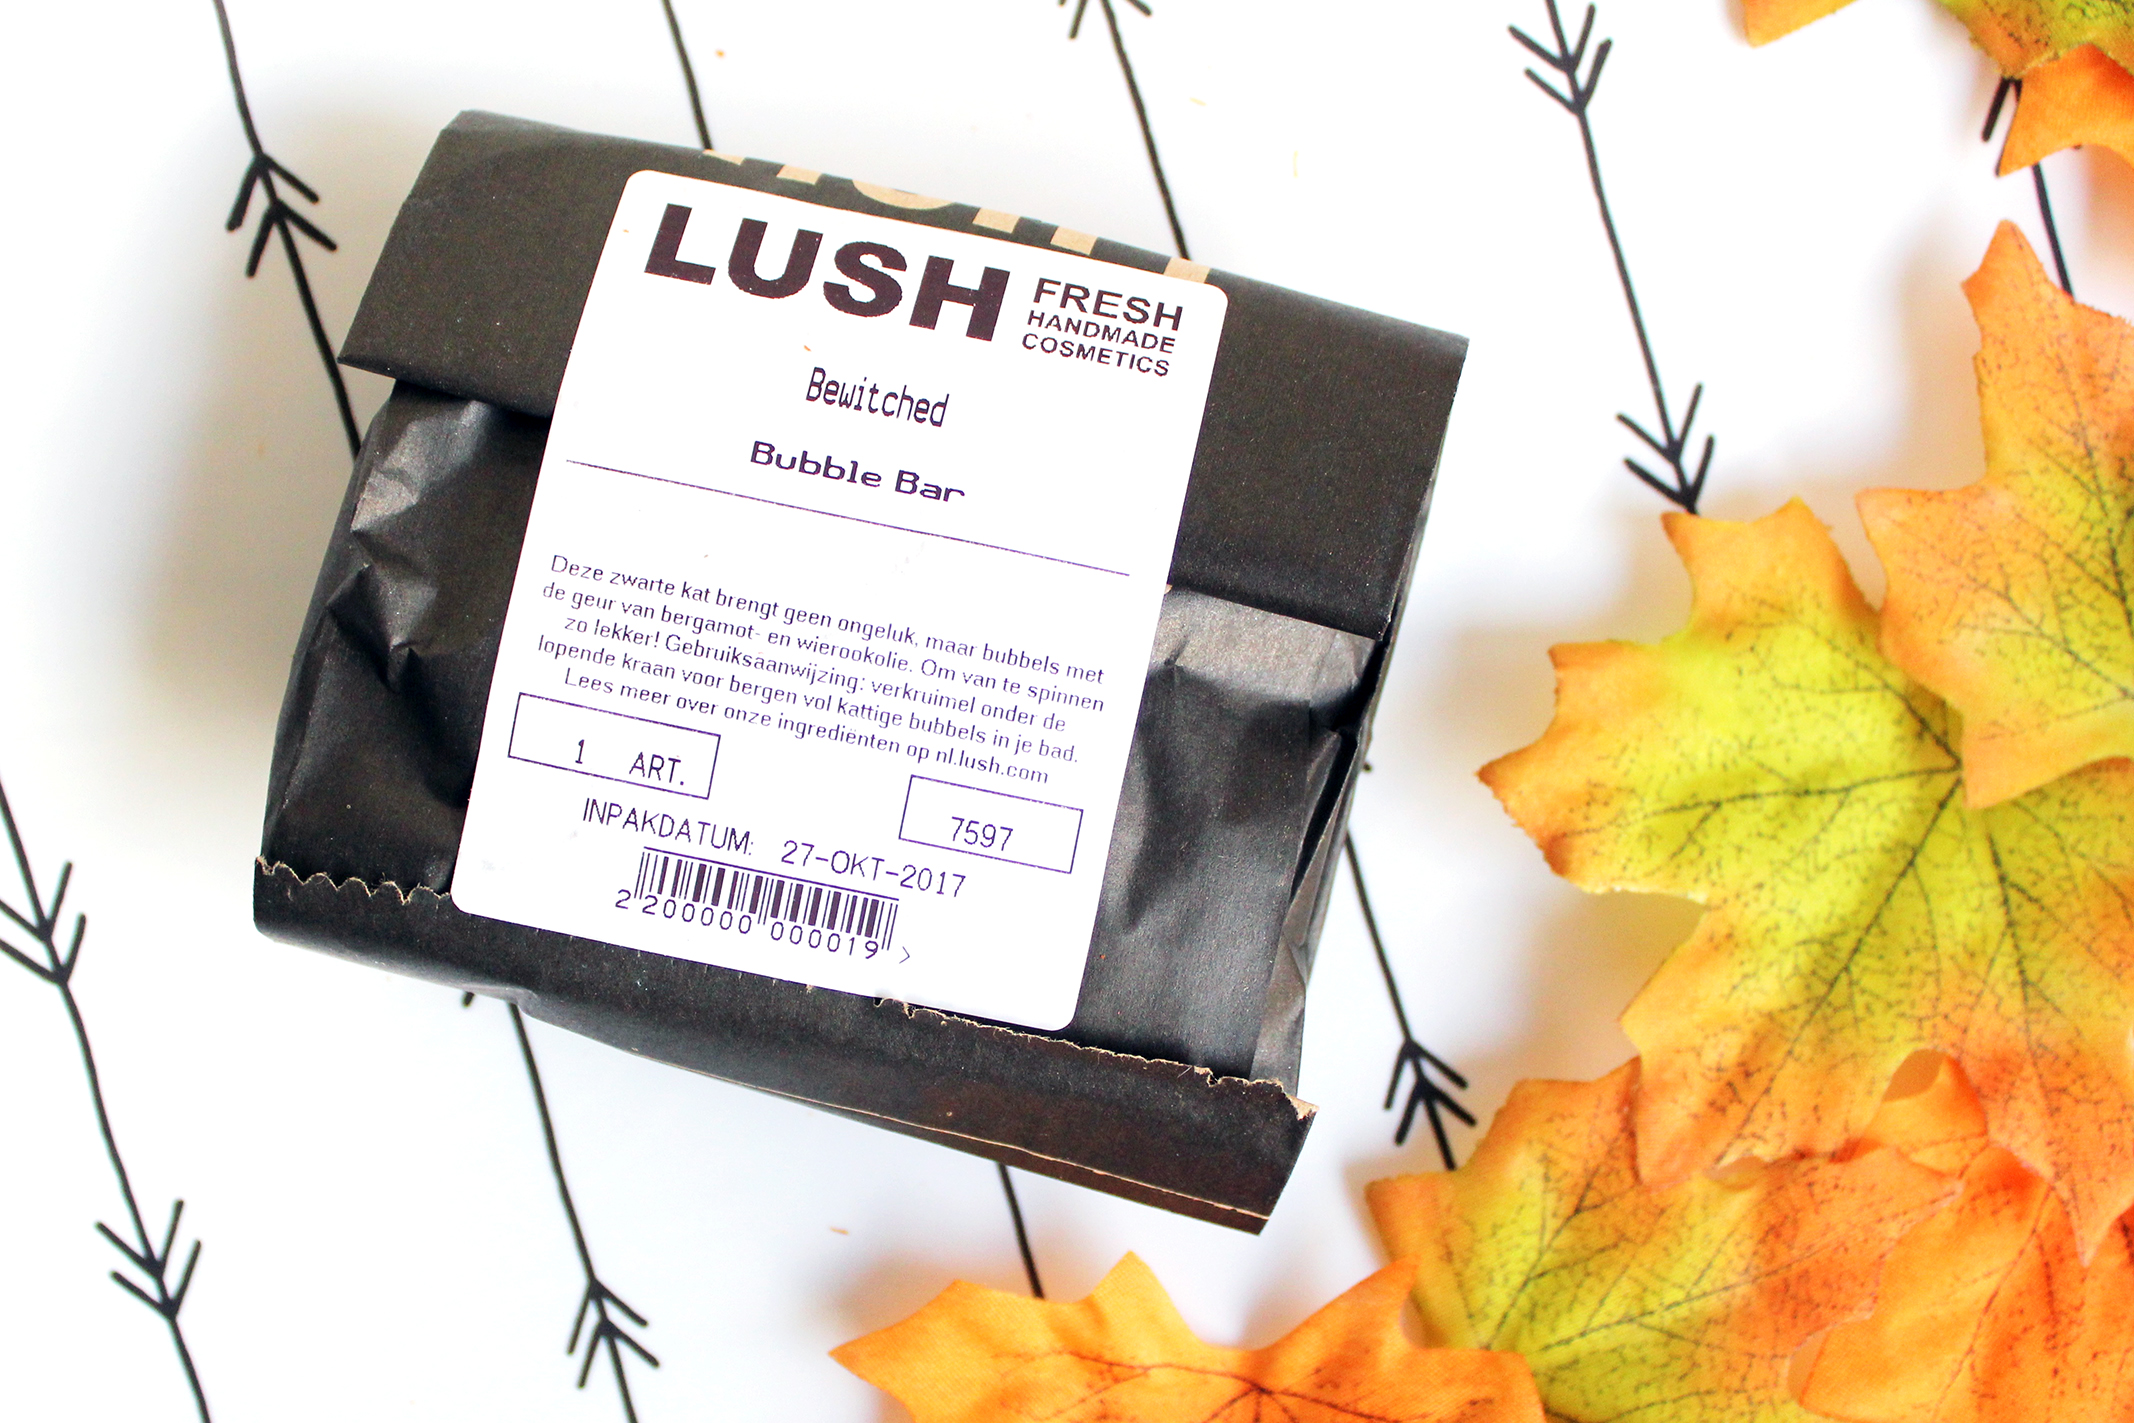 lush bewitched bubble bar